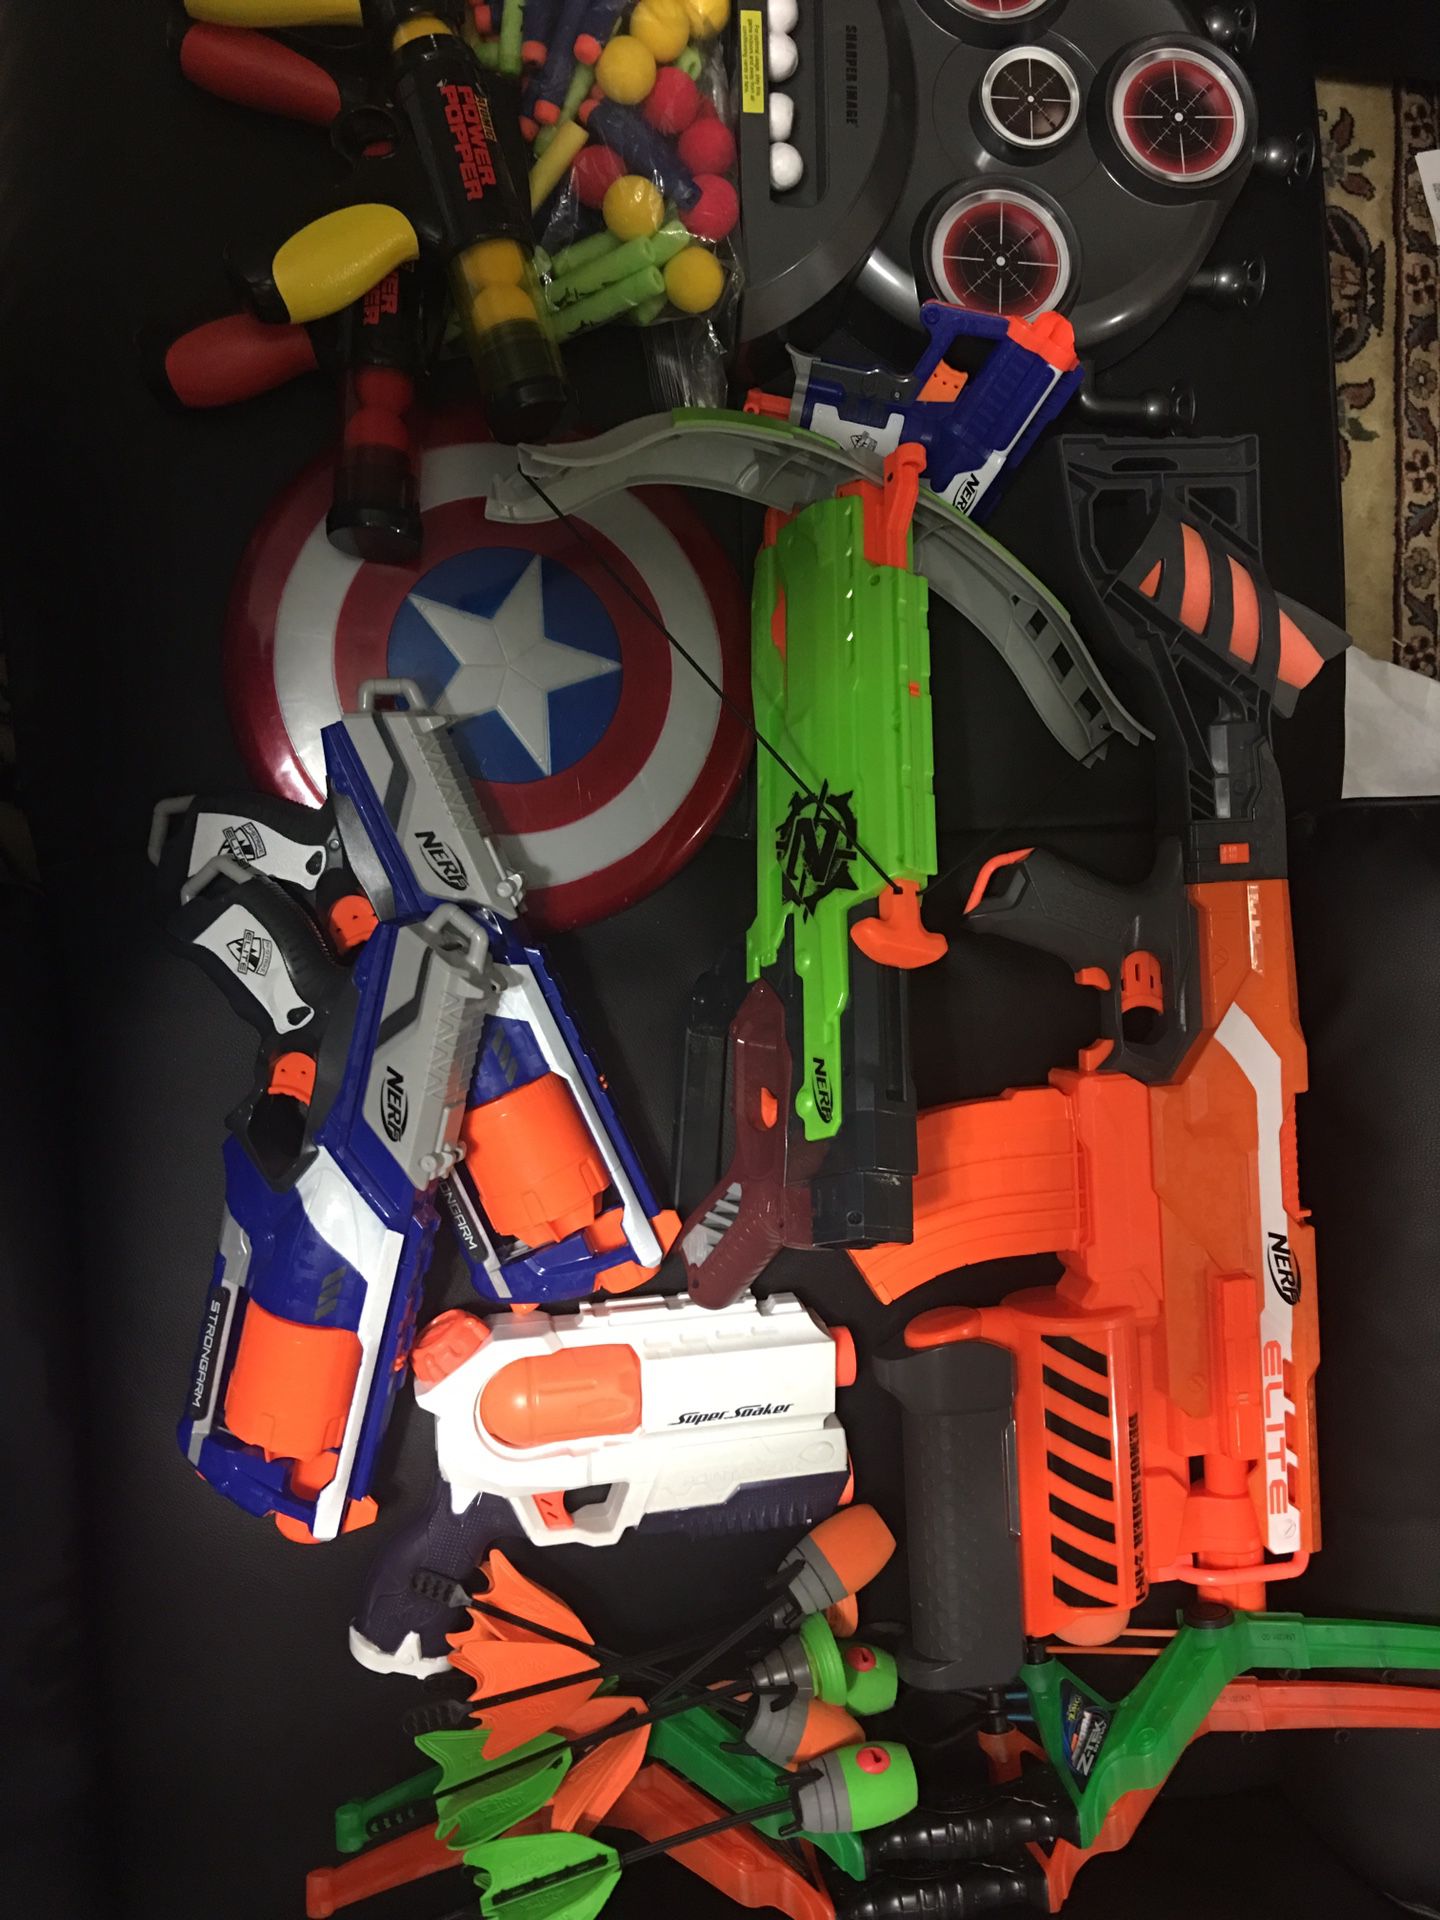 Variety of toy guns and bows. Take everything you see for $20